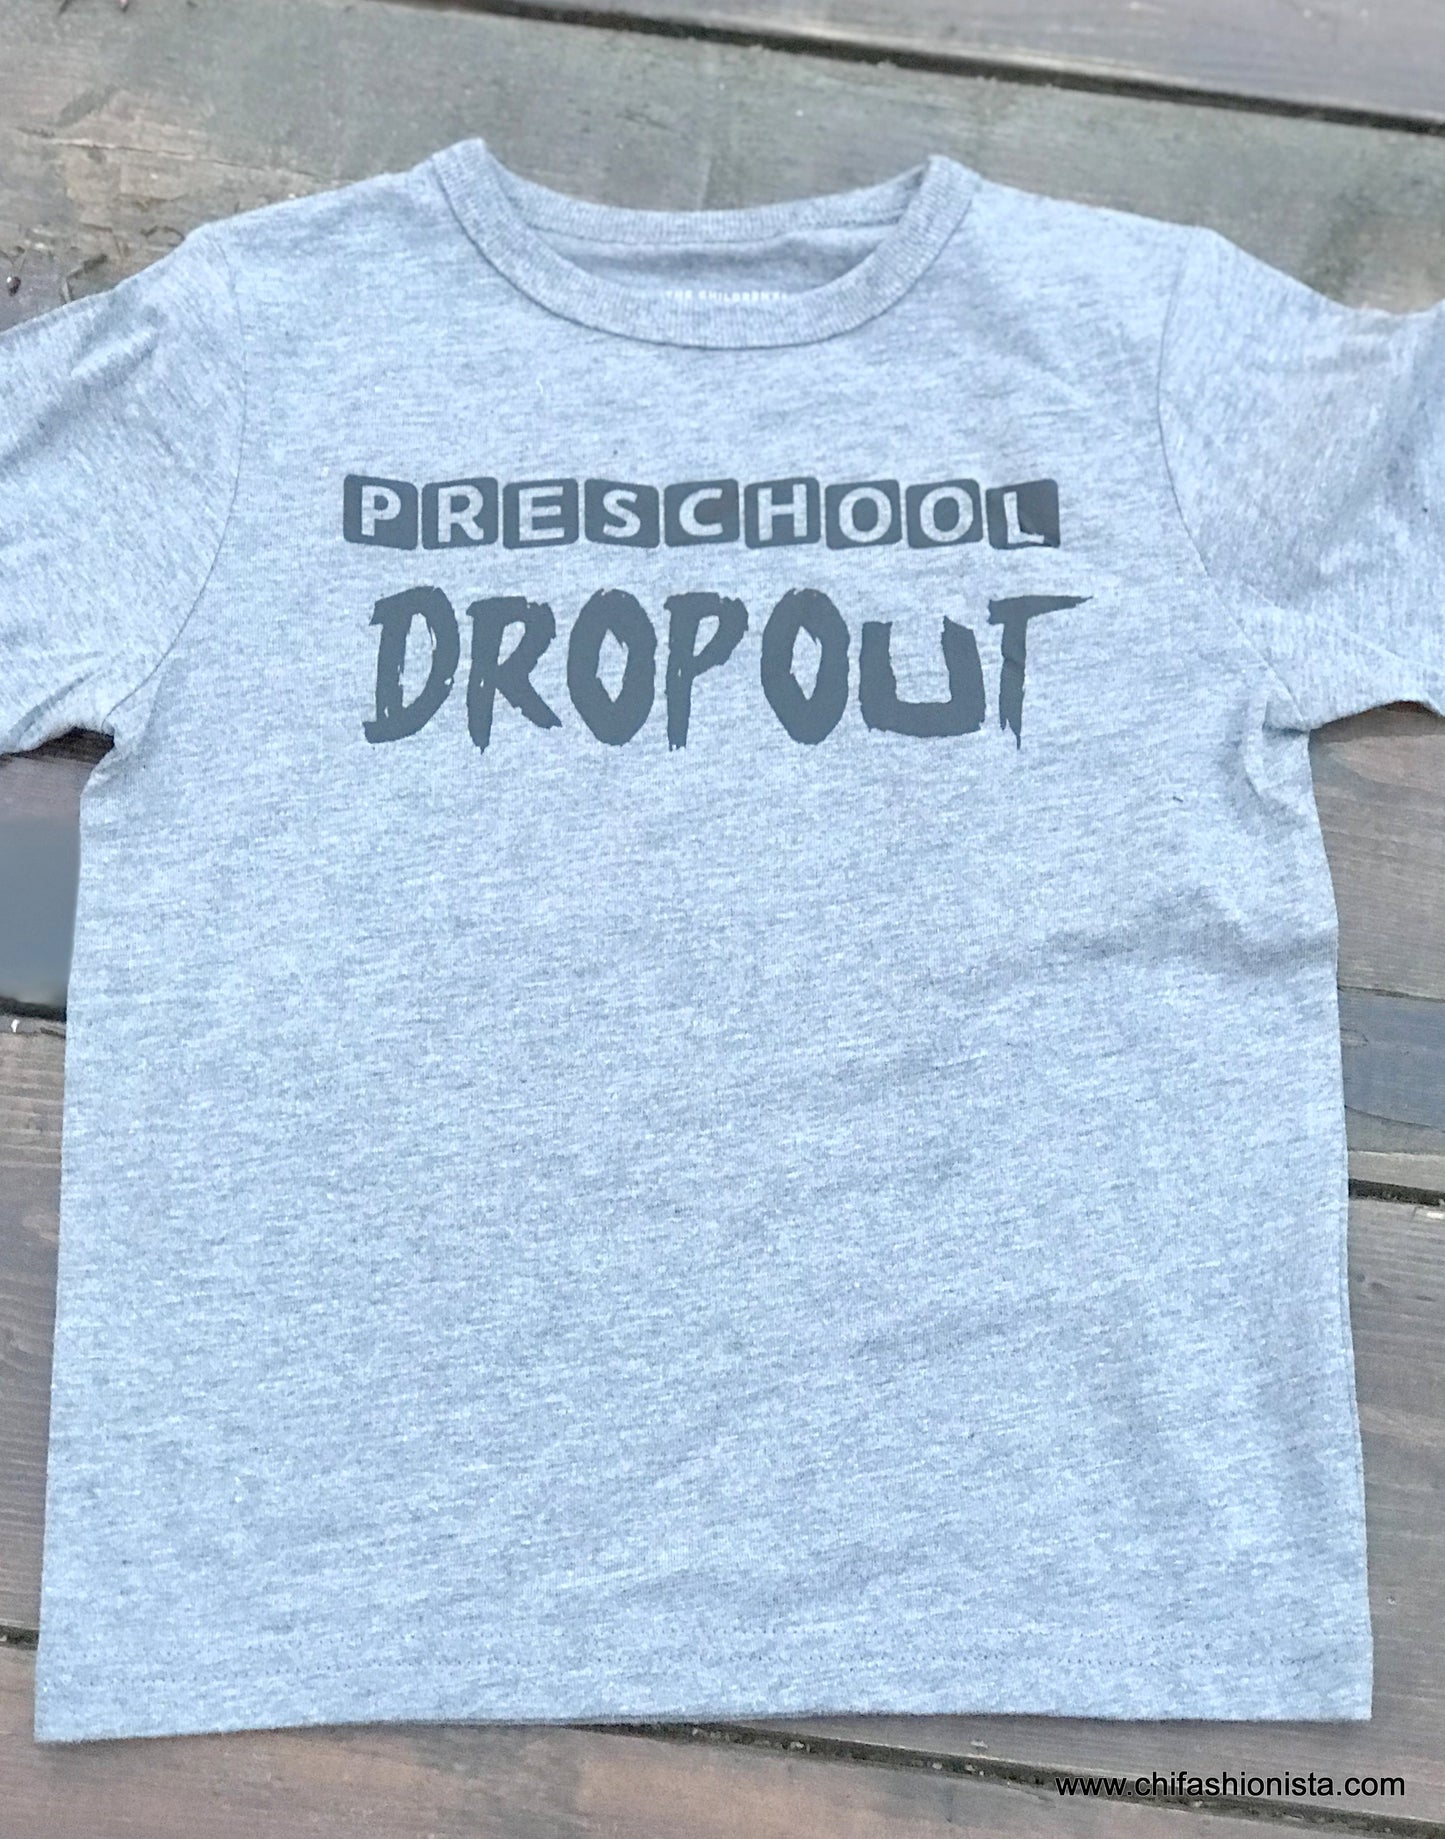 Handcrafted Children's Clothing, Clothing for Children and Parents, Preschool Dropout Shirt, chi-fashionista